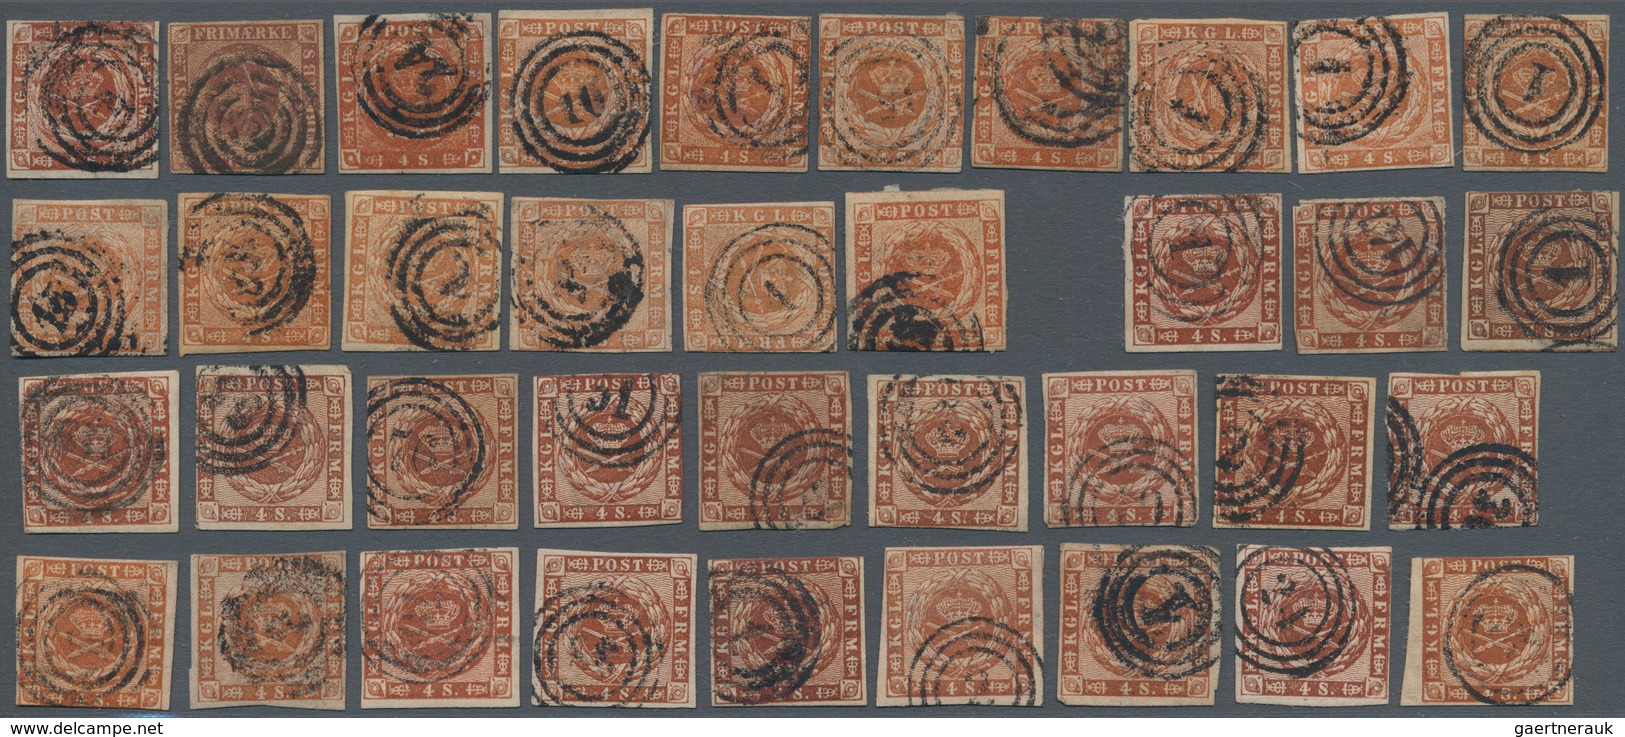 Dänemark: 1854-62, Group Of 73 Used Stamps Of 4s., With 16 From The 1854-57 Issues And 57 Of 1858-62 - Covers & Documents